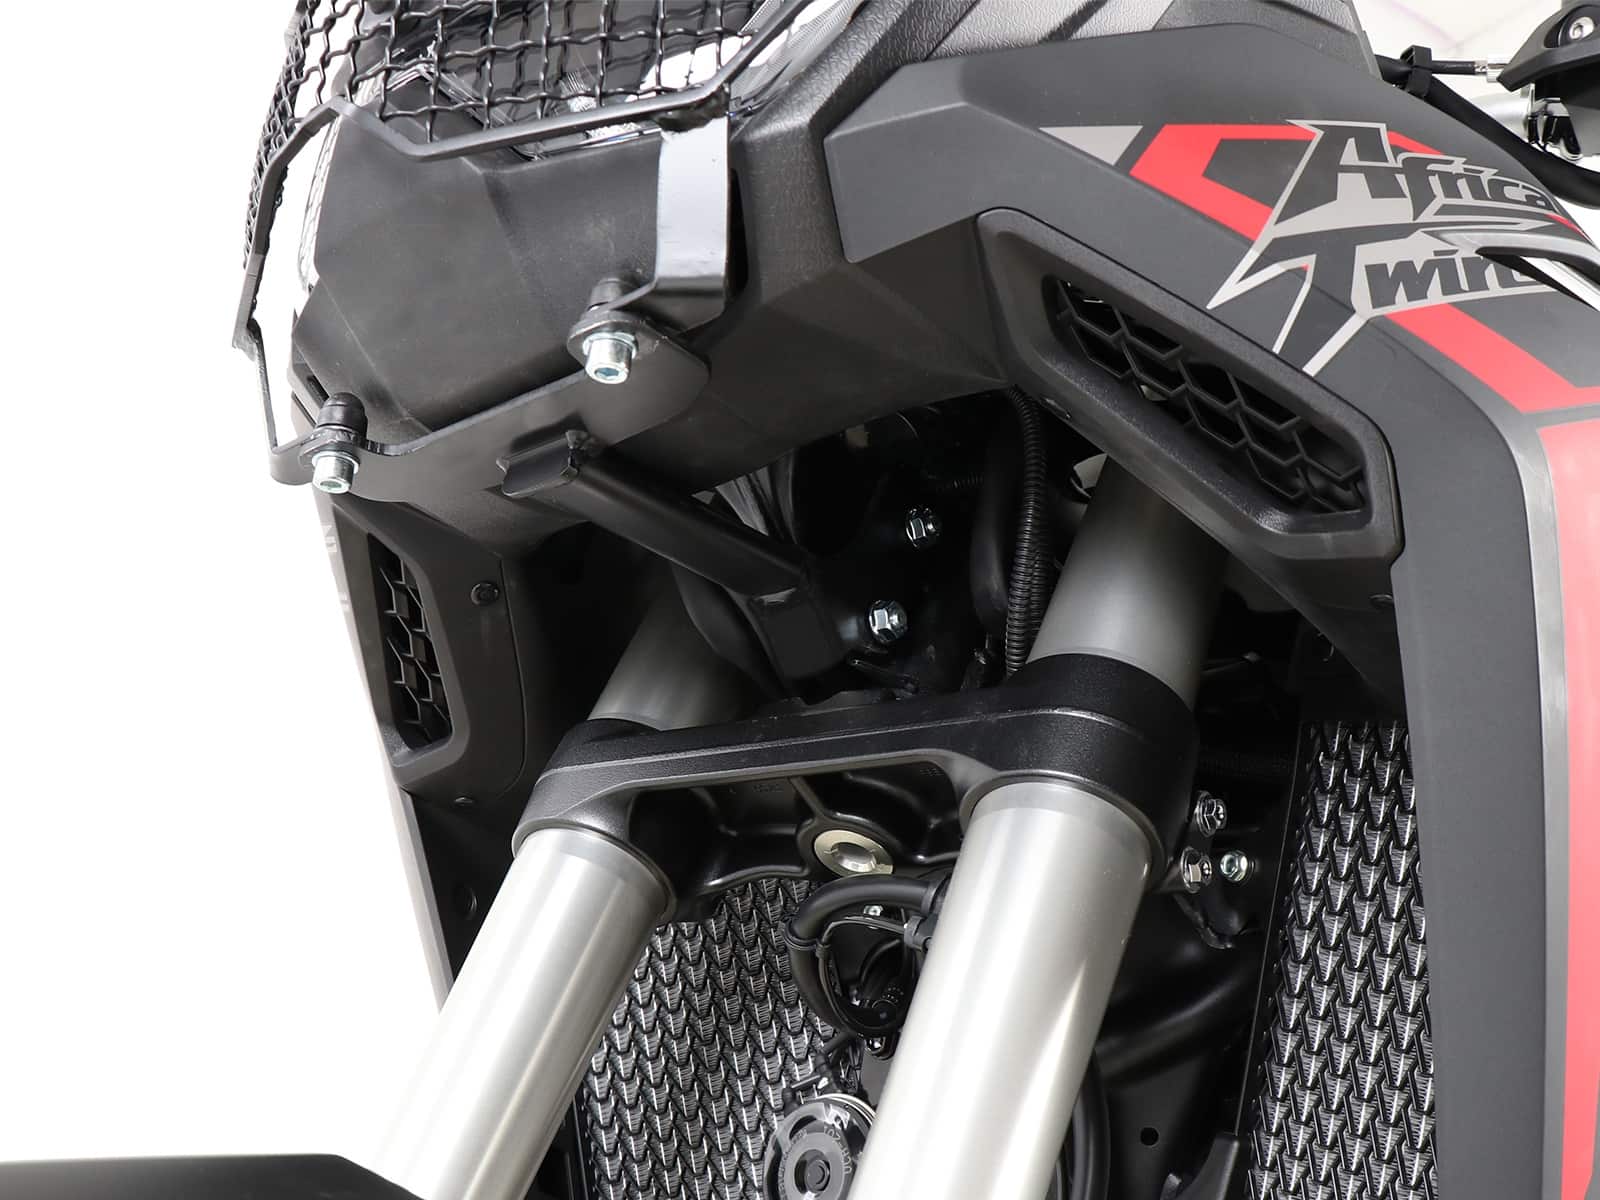 Adapter for Headlight grill if no tankguard is mounted for Honda CRF 1100L Africa Twin Adventure Sports (2020-)